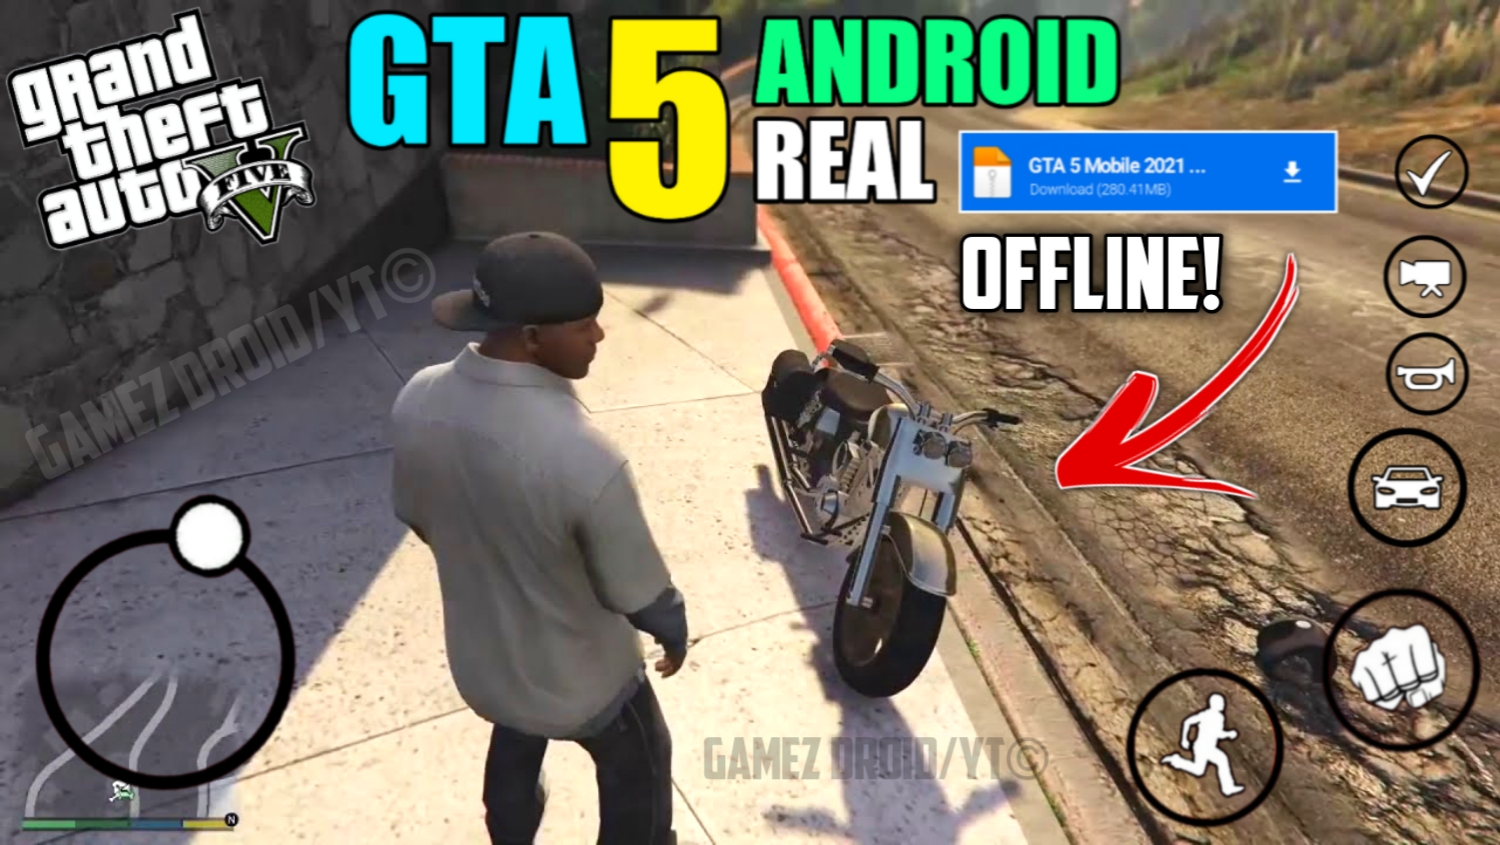 Is there any real gta 5 gameplay фото 116